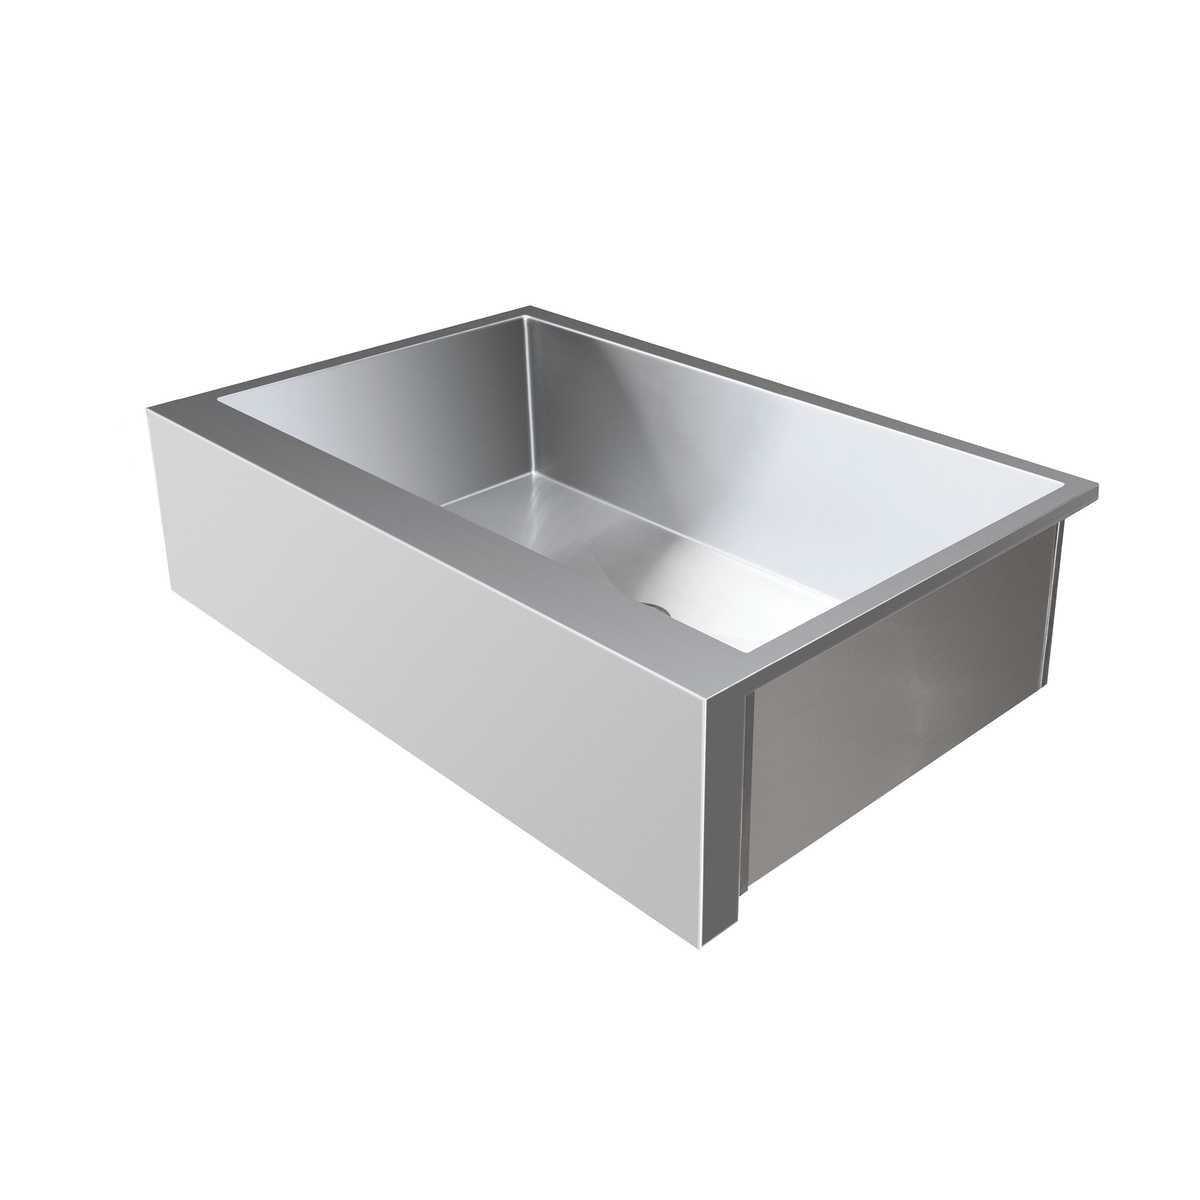 32" Outdoor Rated Farmhouse Sink